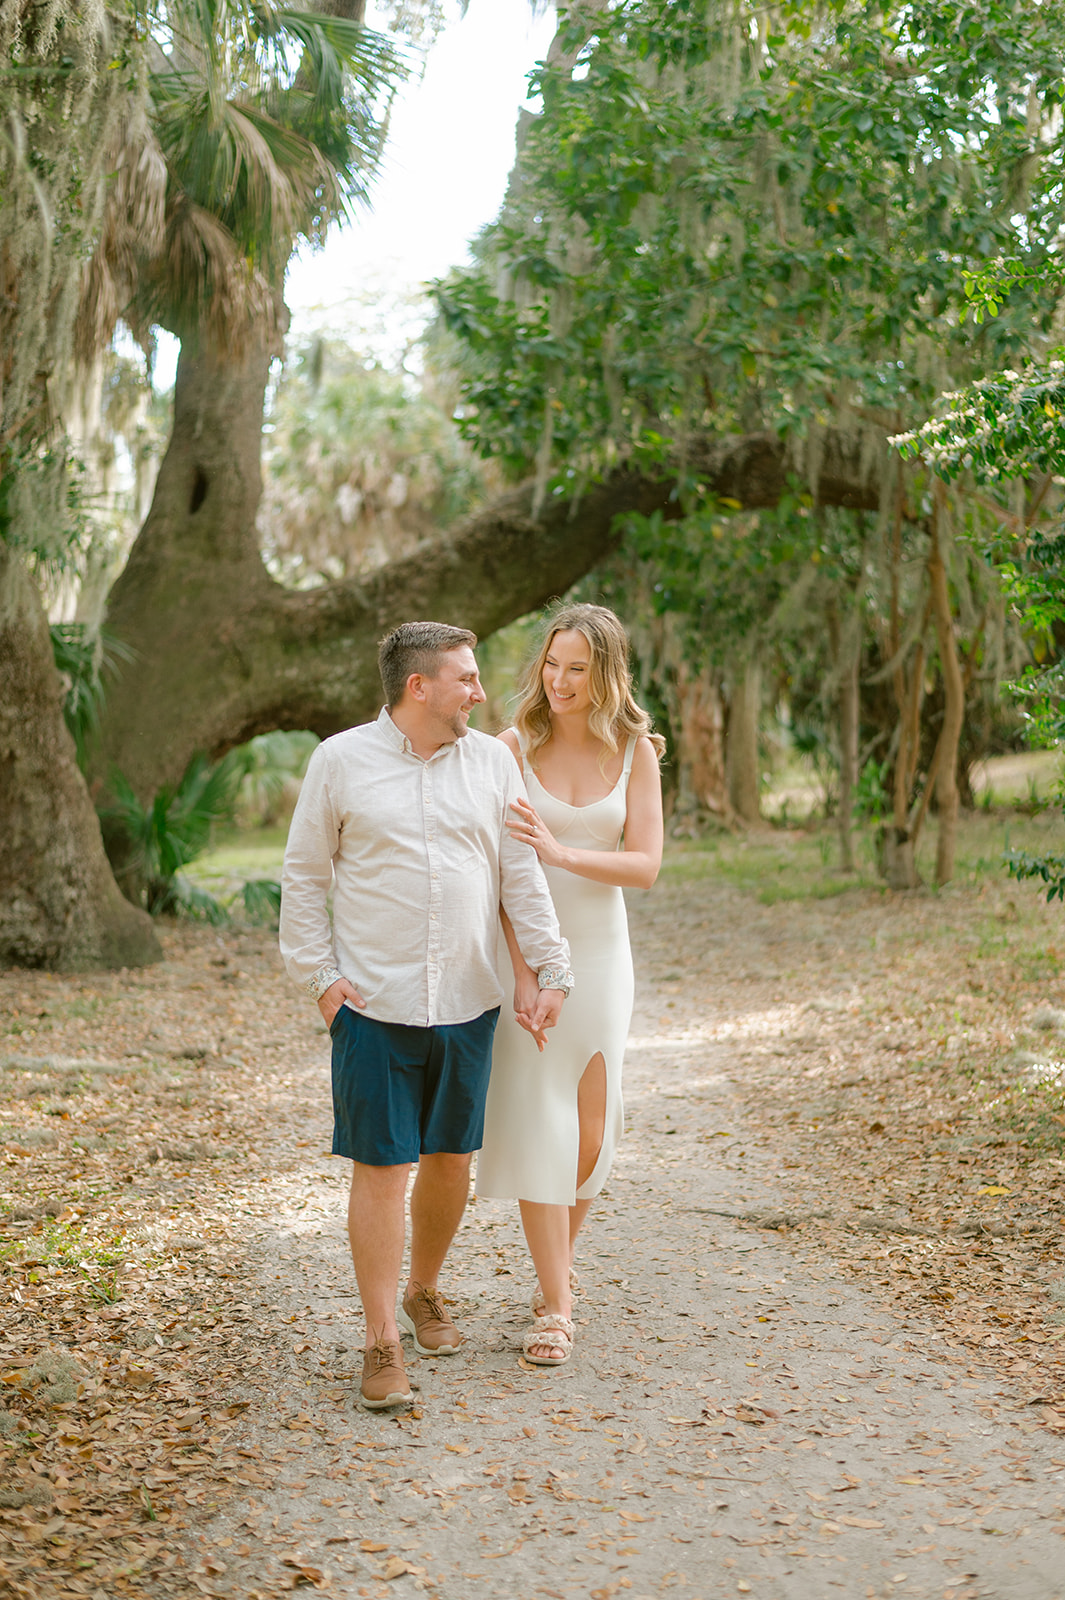 "Loving engagement photo in Tampa's Philippe Park"
